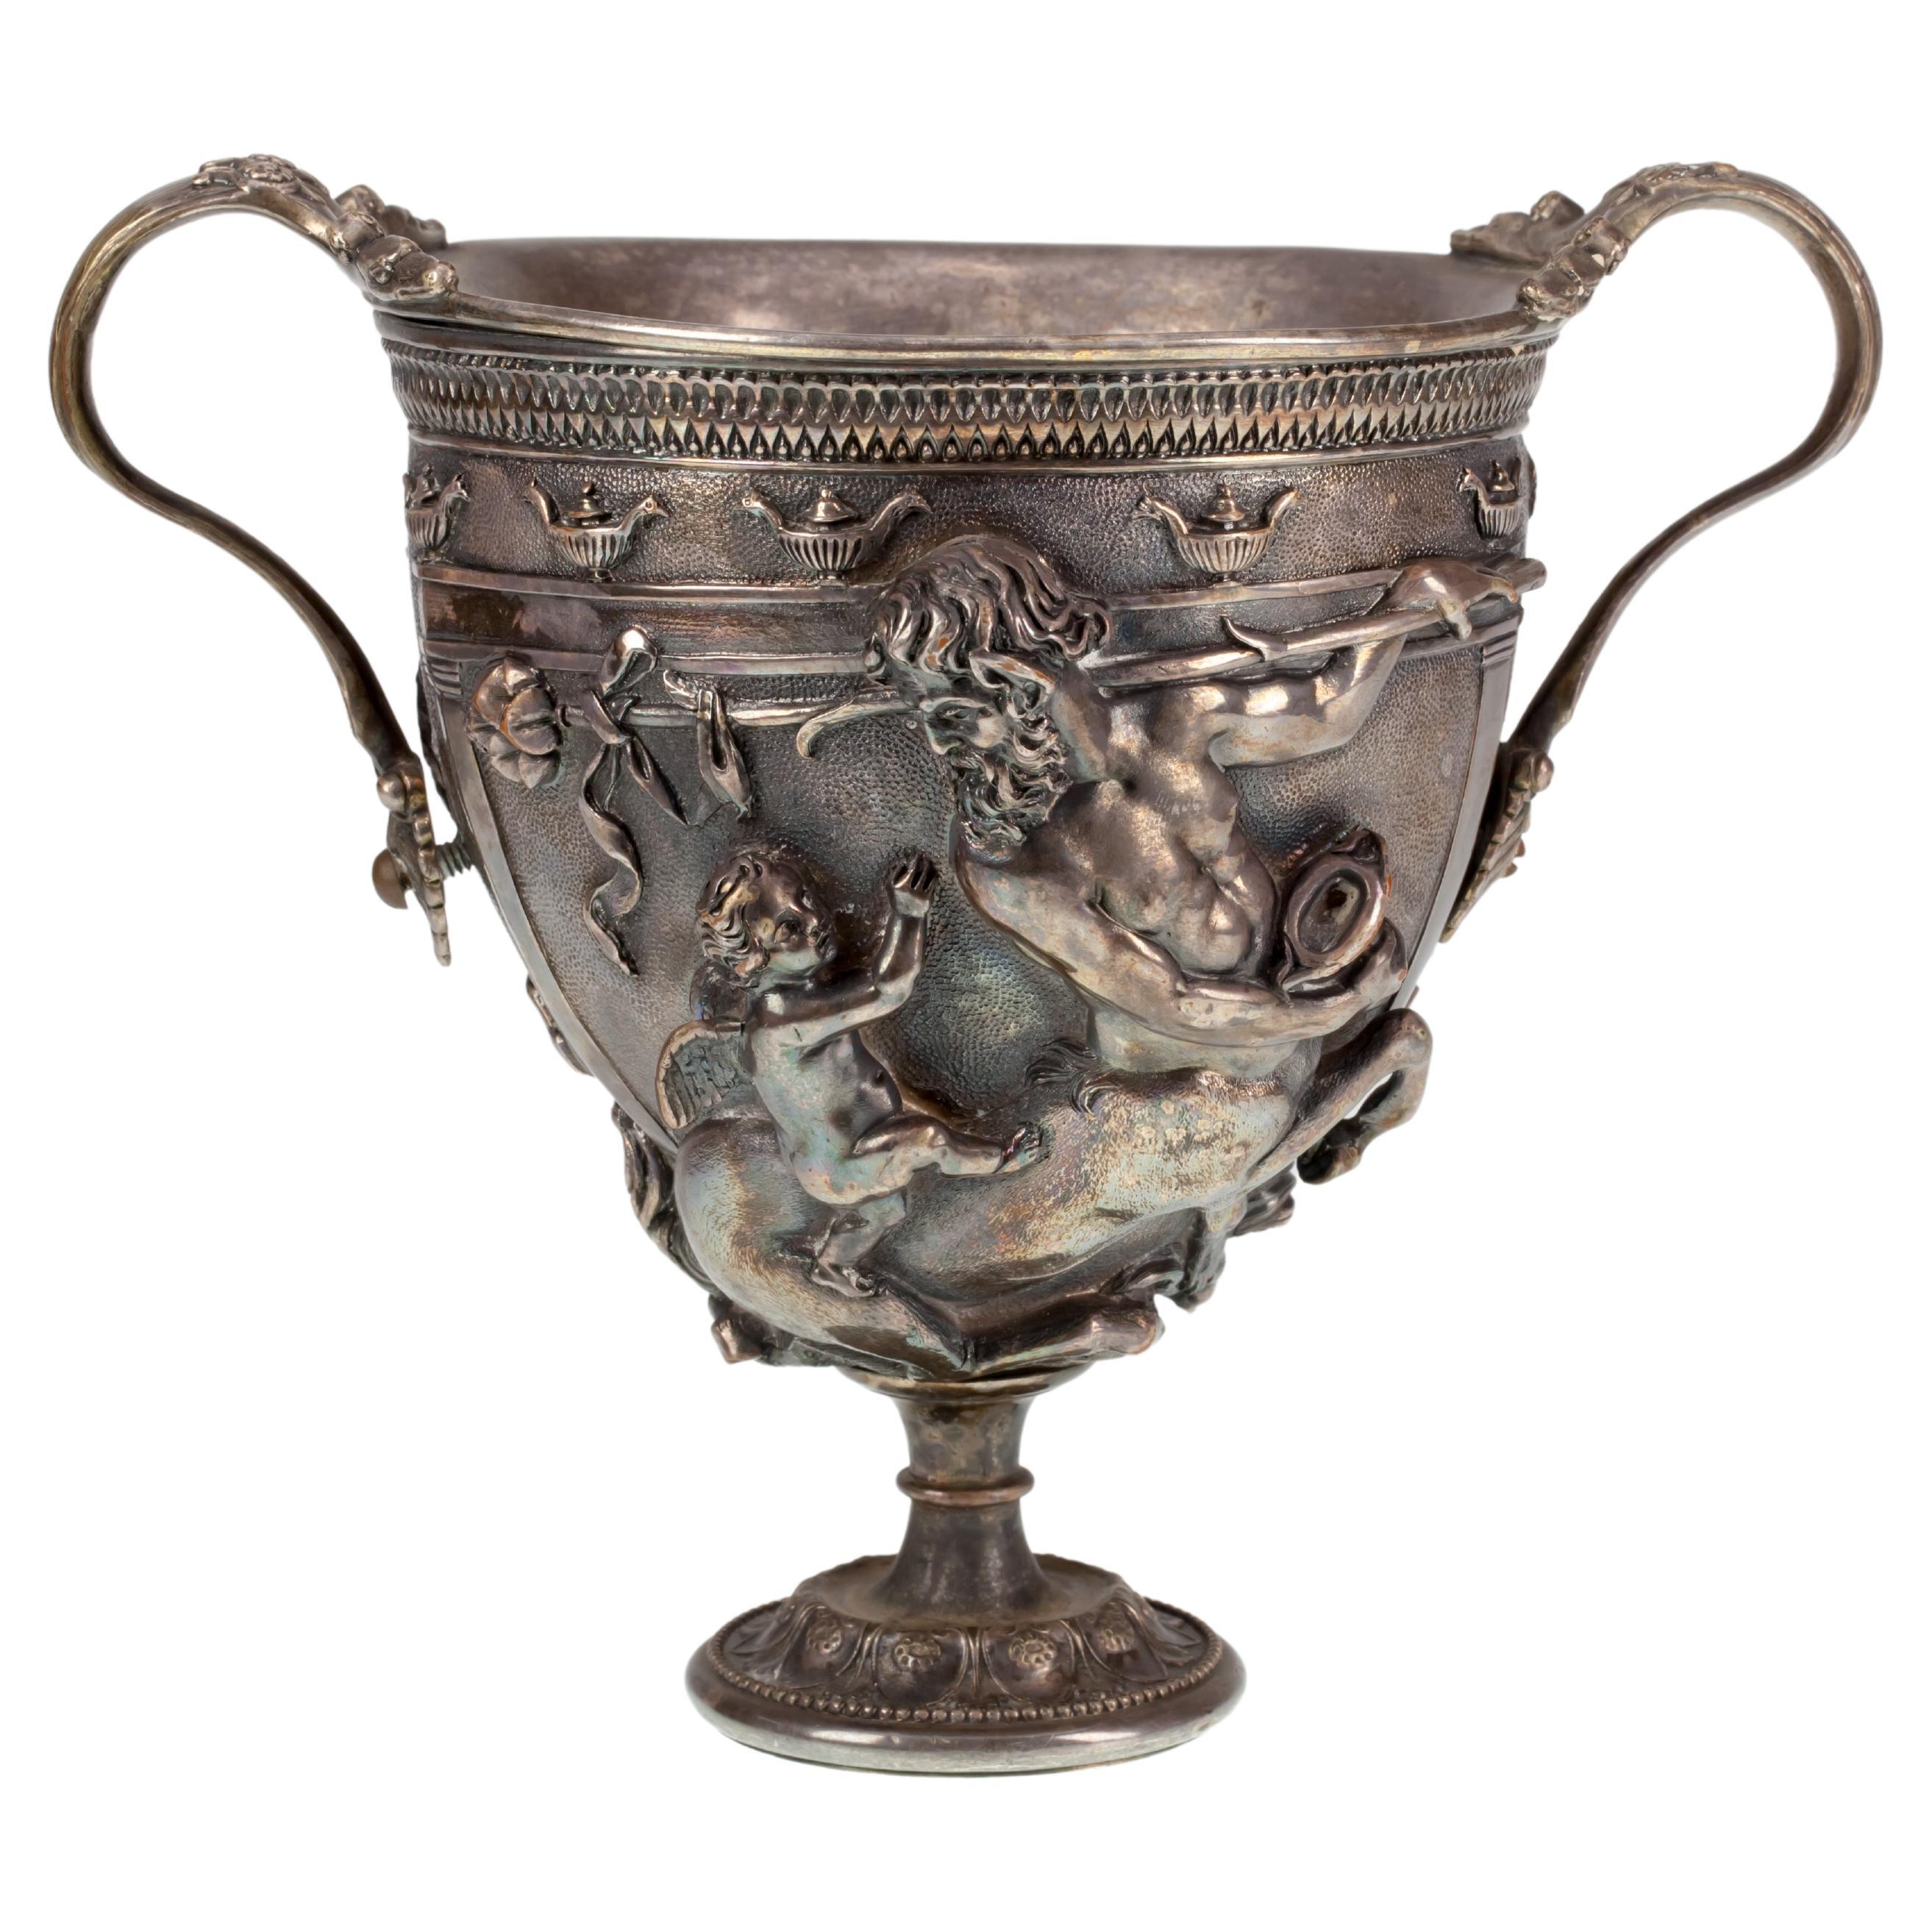 Elkington & Co. Silver-Plated Trophy Cup Urn with Neoclassical Figures Repousse